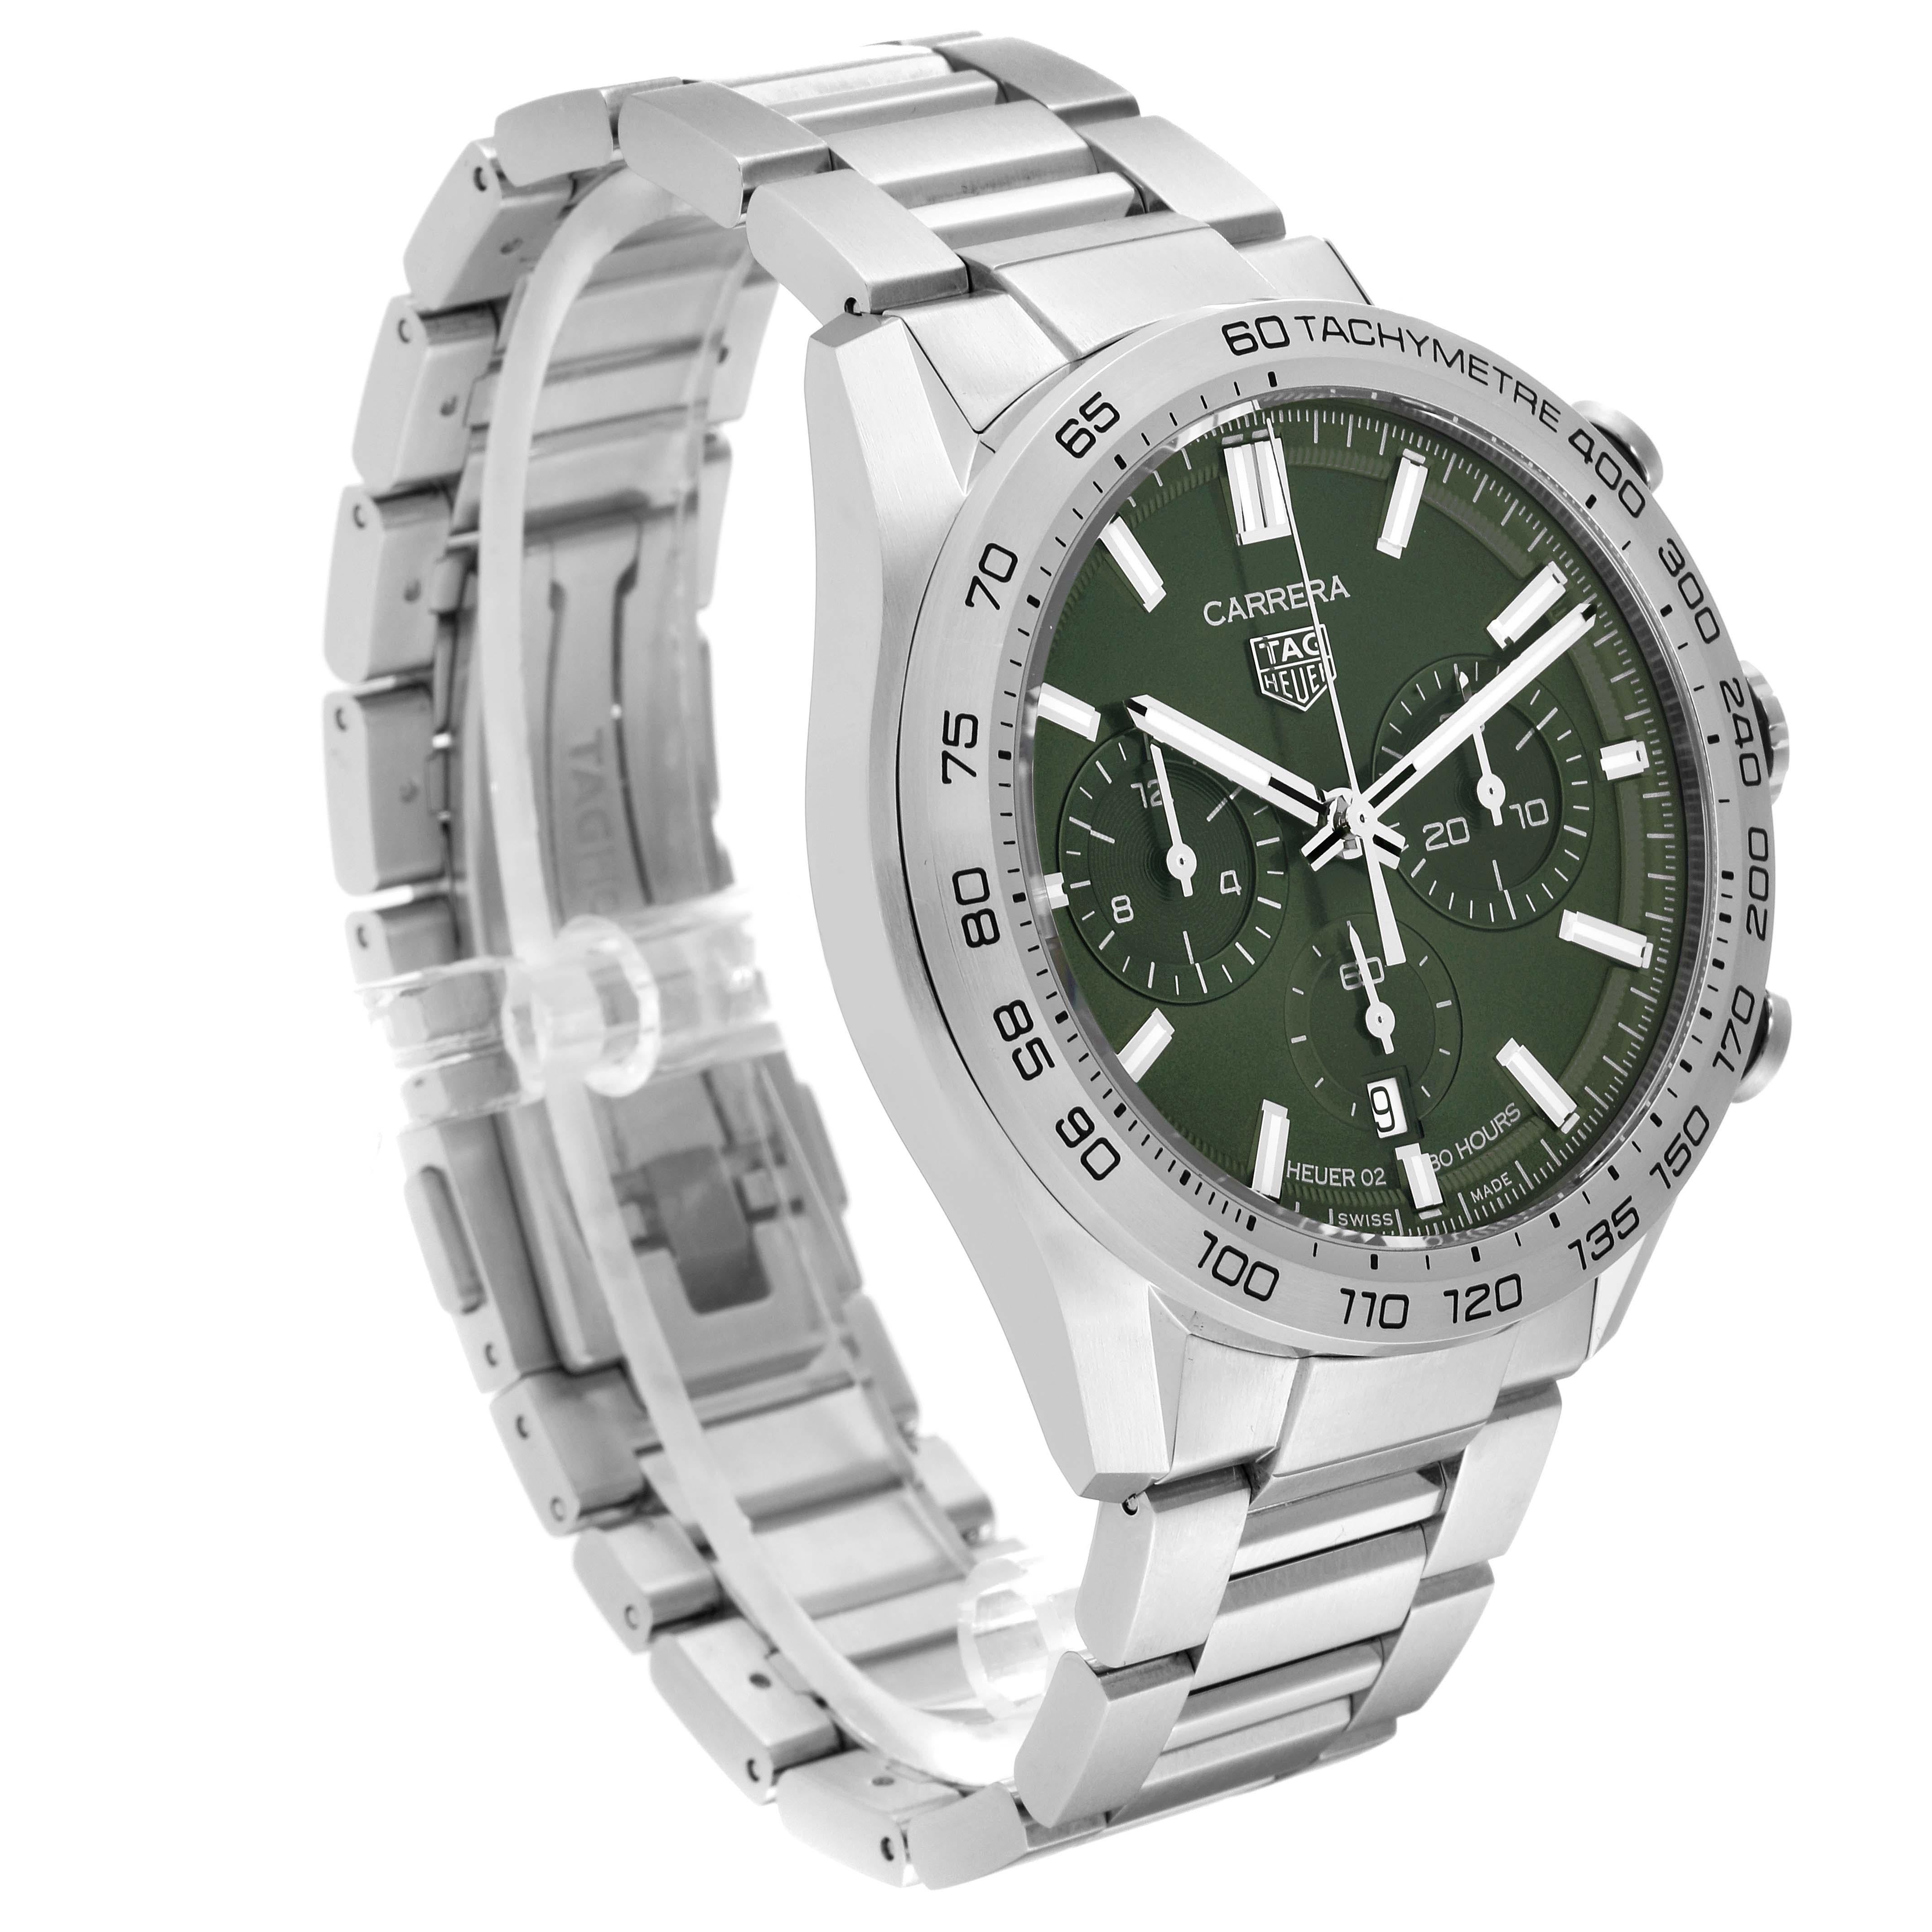 Tag Heuer Carrera Chronograph Green Dial Steel Mens Watch CBN2A10 Box Card For Sale 2